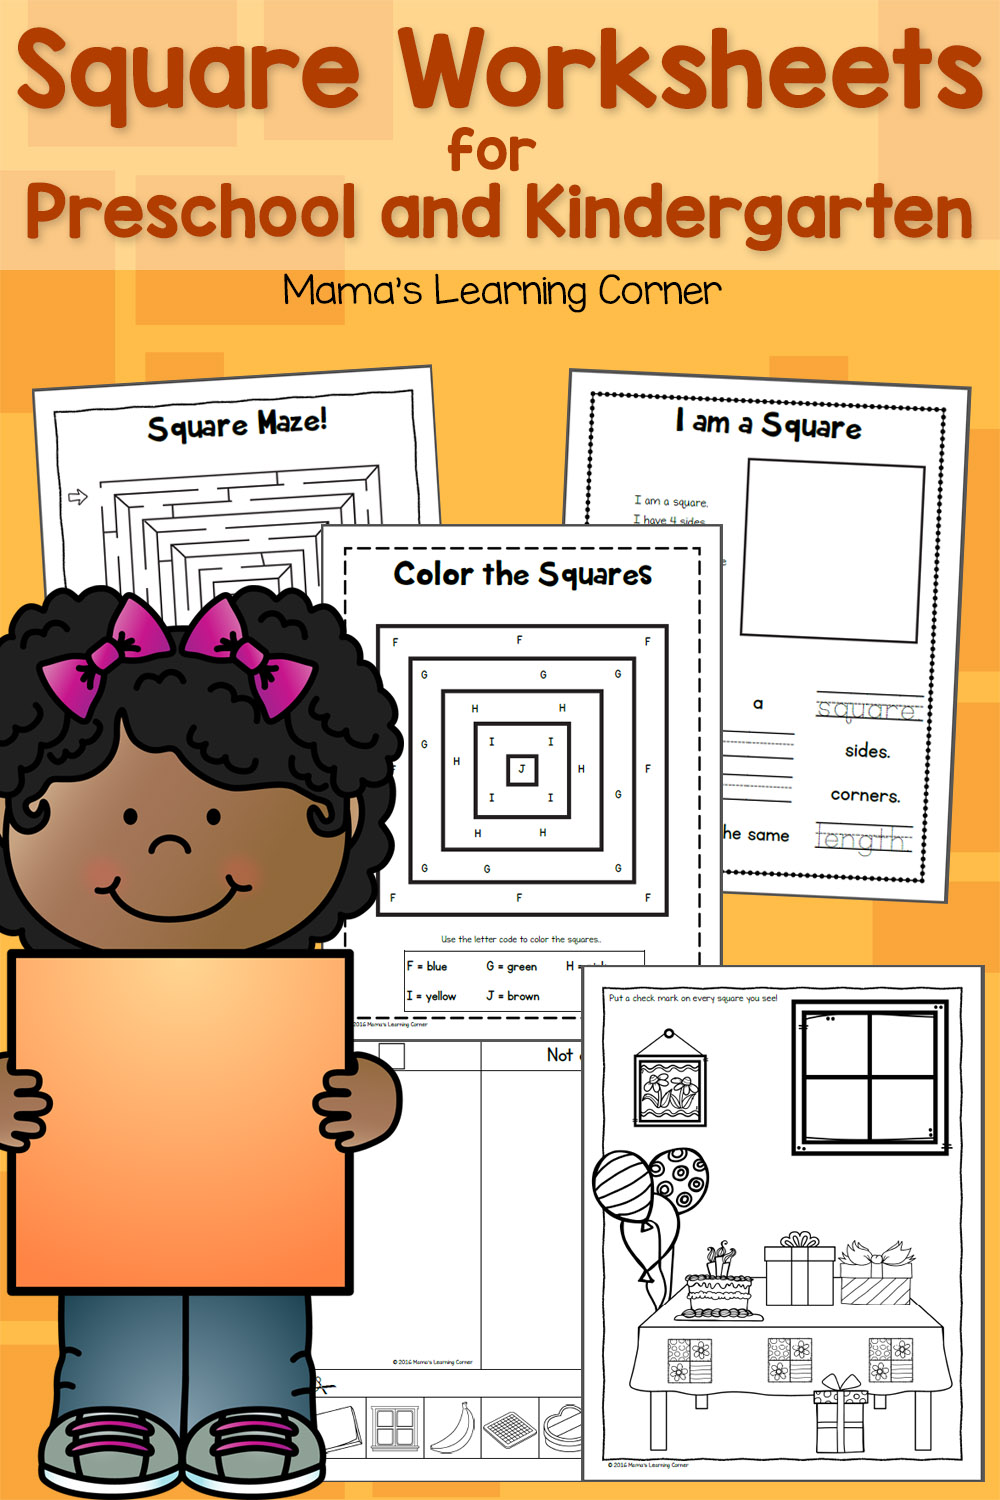 Square Worksheets for Preschool and Kindergarten - Mamas ...